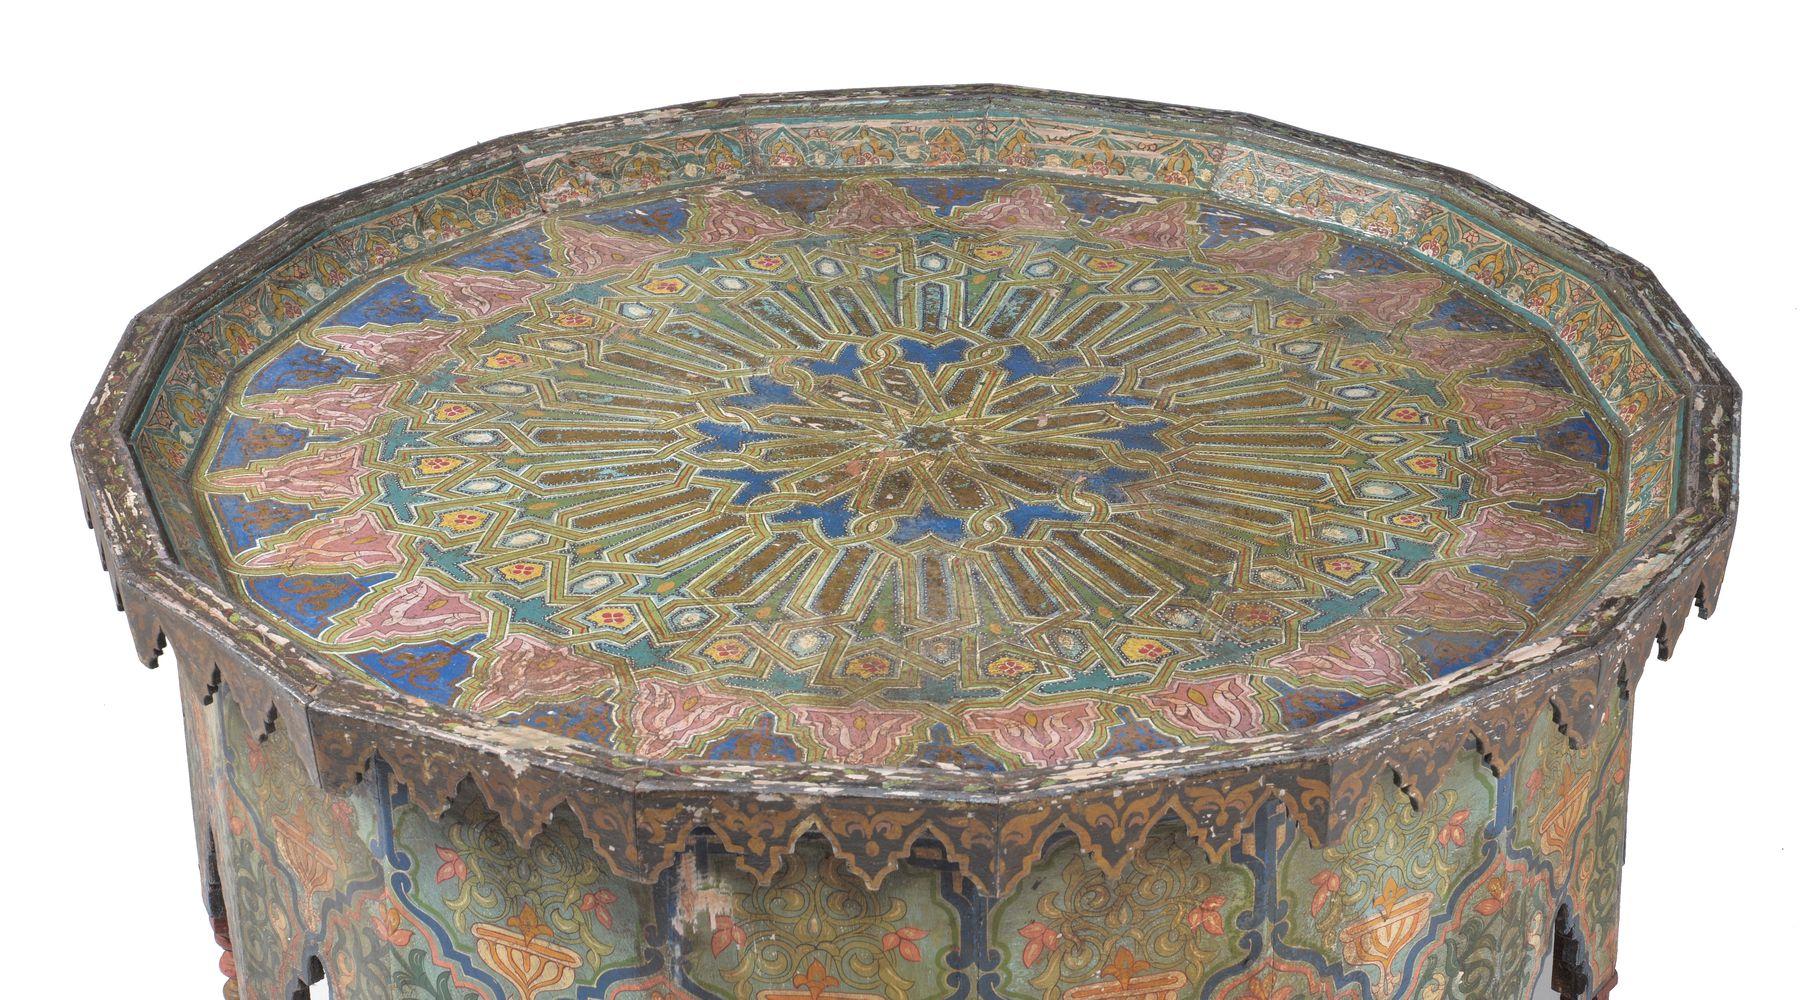 A large Indian polygonal wooden table - Image 2 of 3